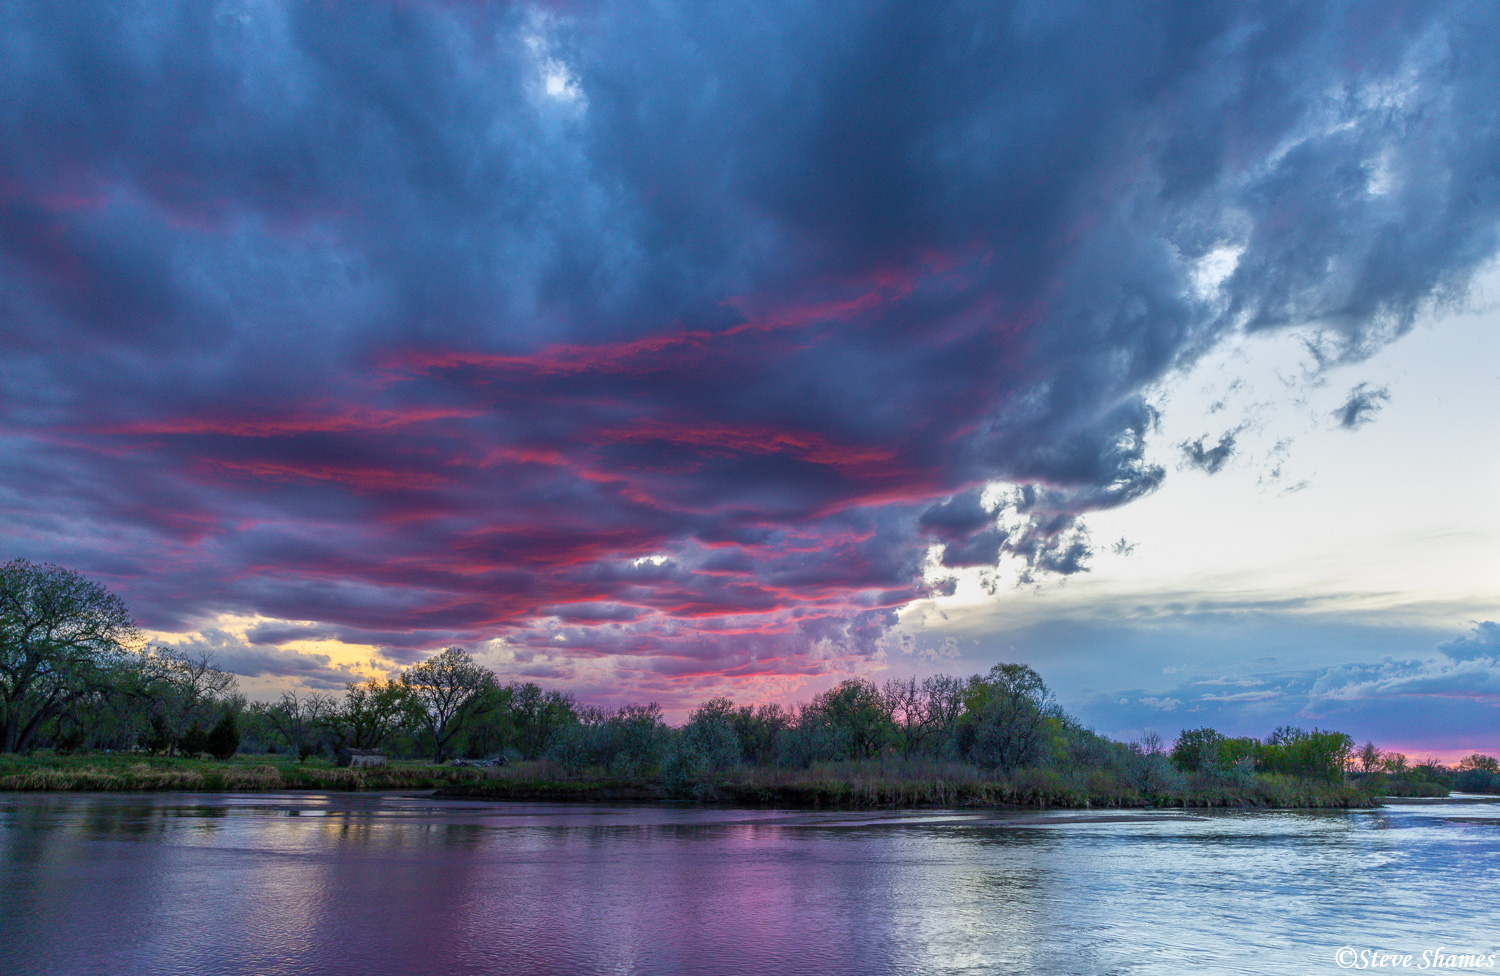 After a massive hail storm, we had a great sunset along the North Platte River in Bridgeport.